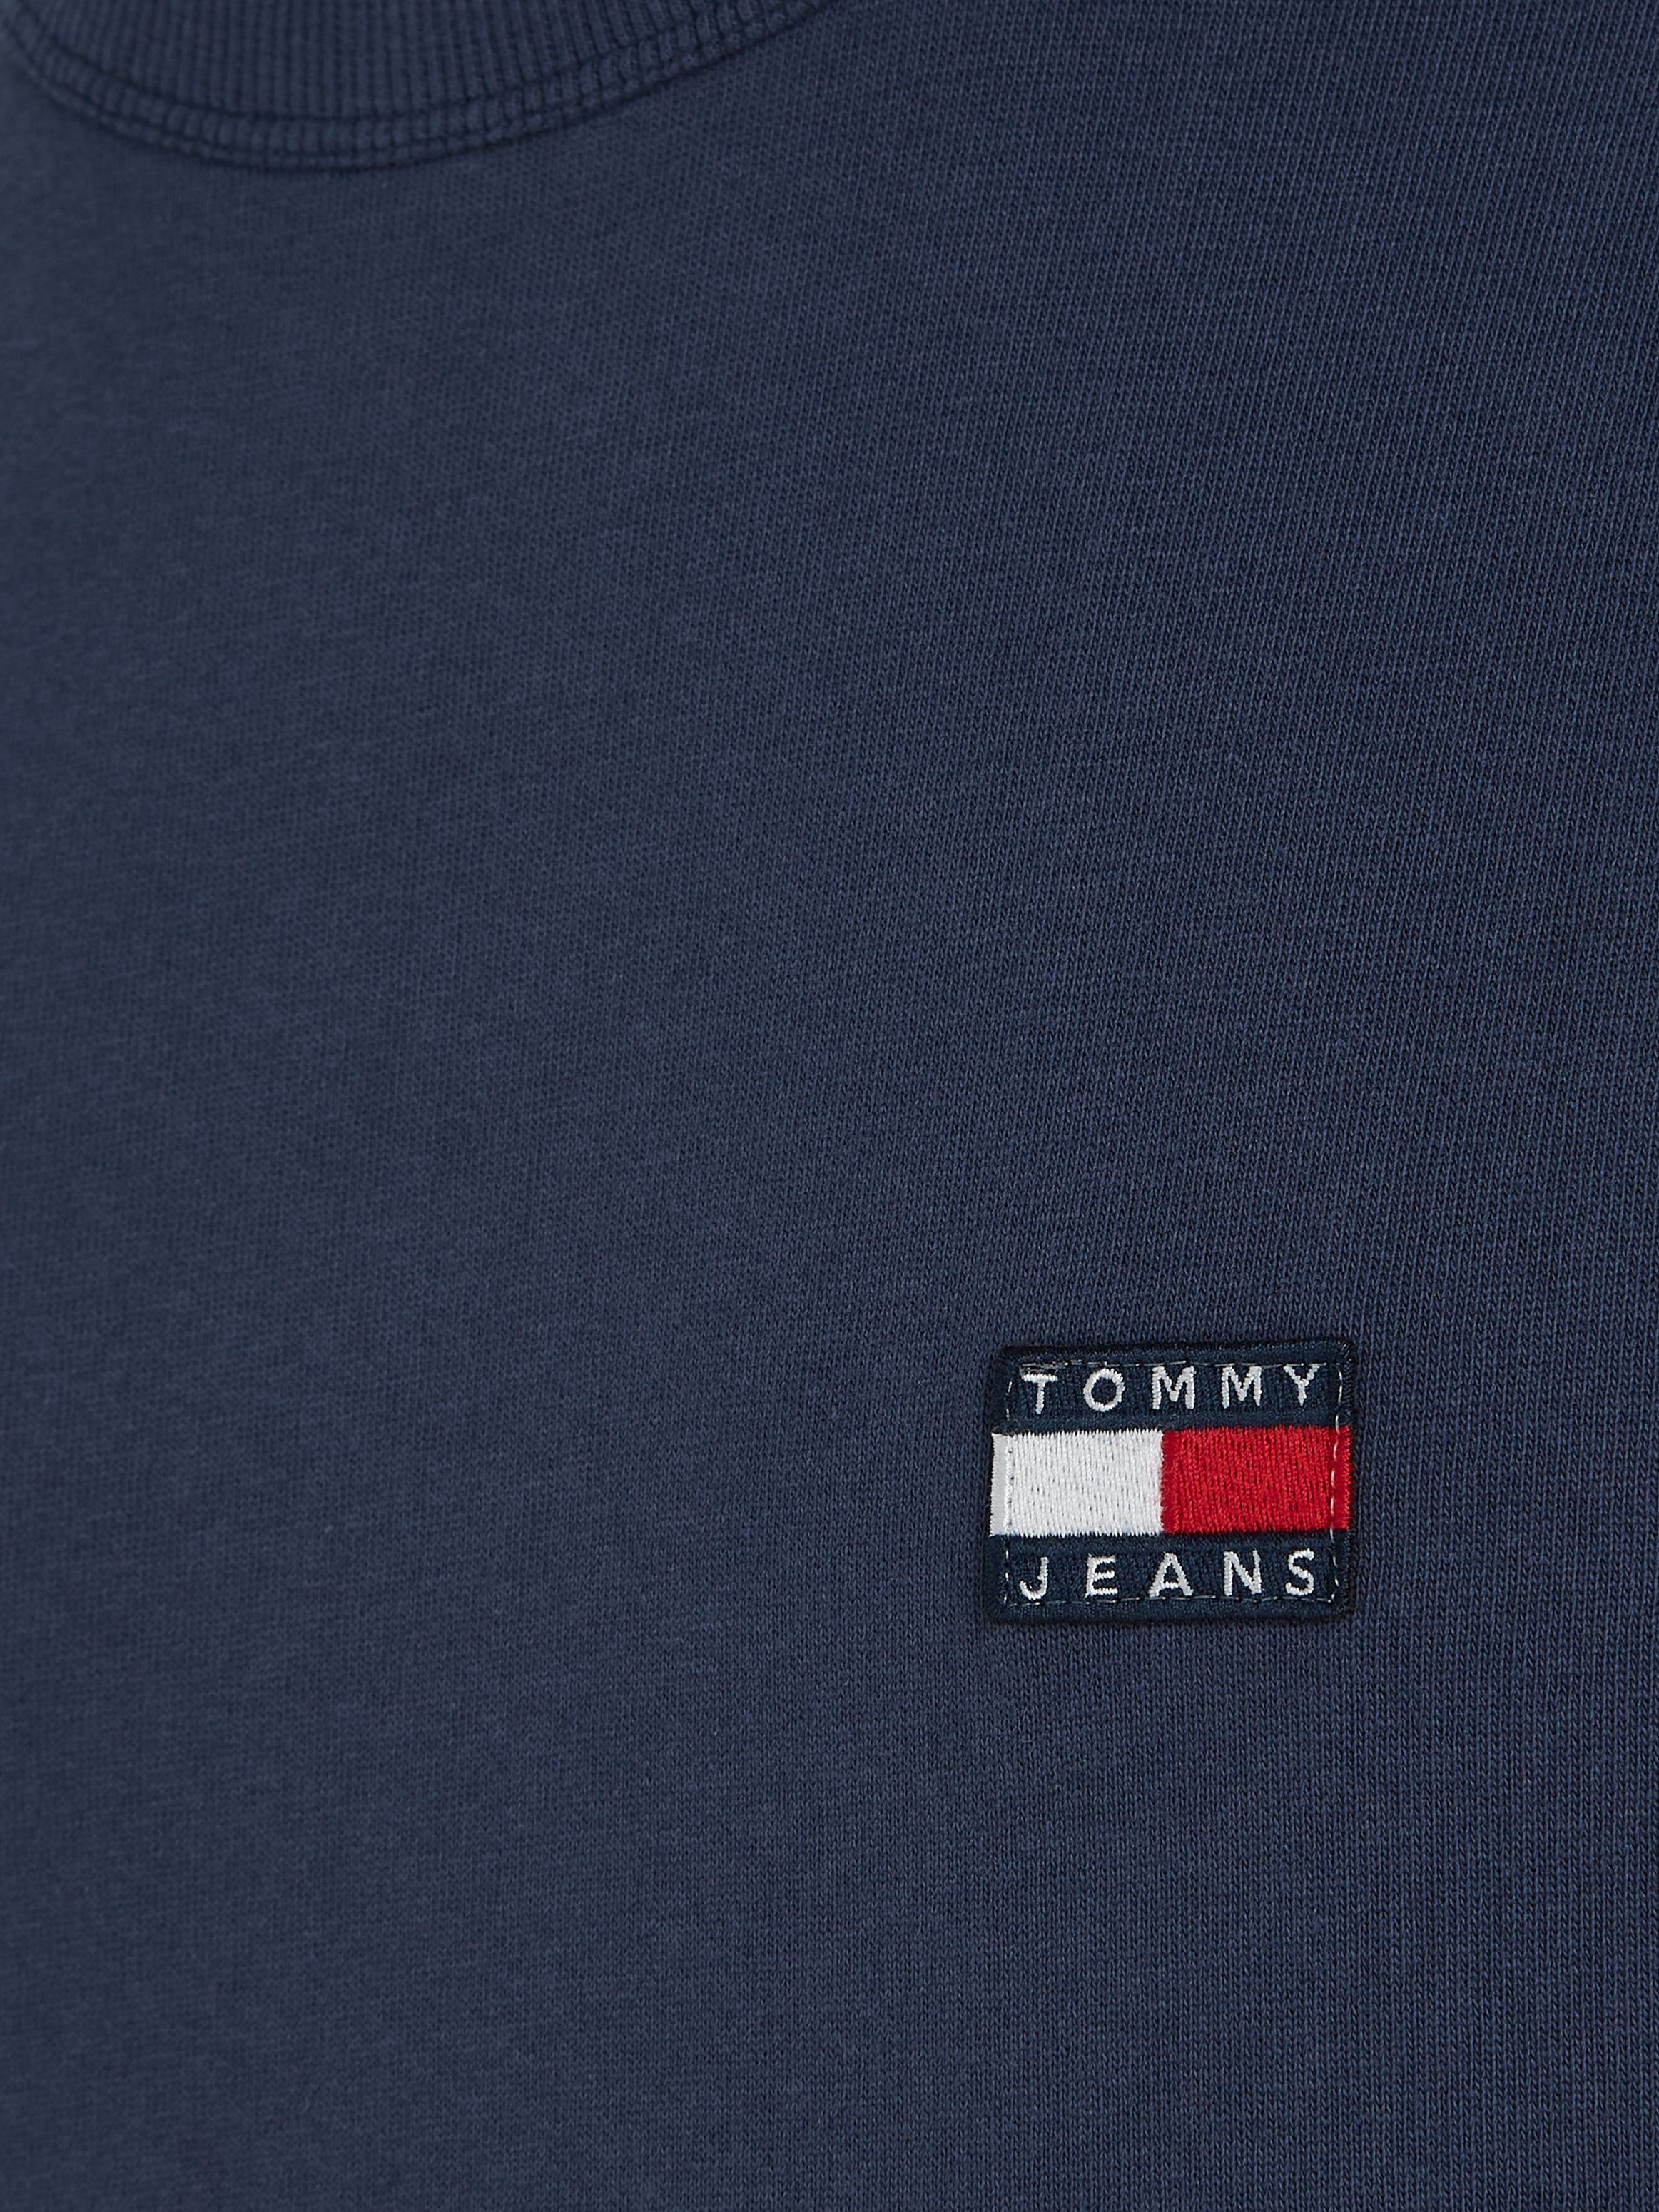 BADGE CLSC XS Jeans Tommy TEE Twilight T-Shirt Navy TJM TOMMY